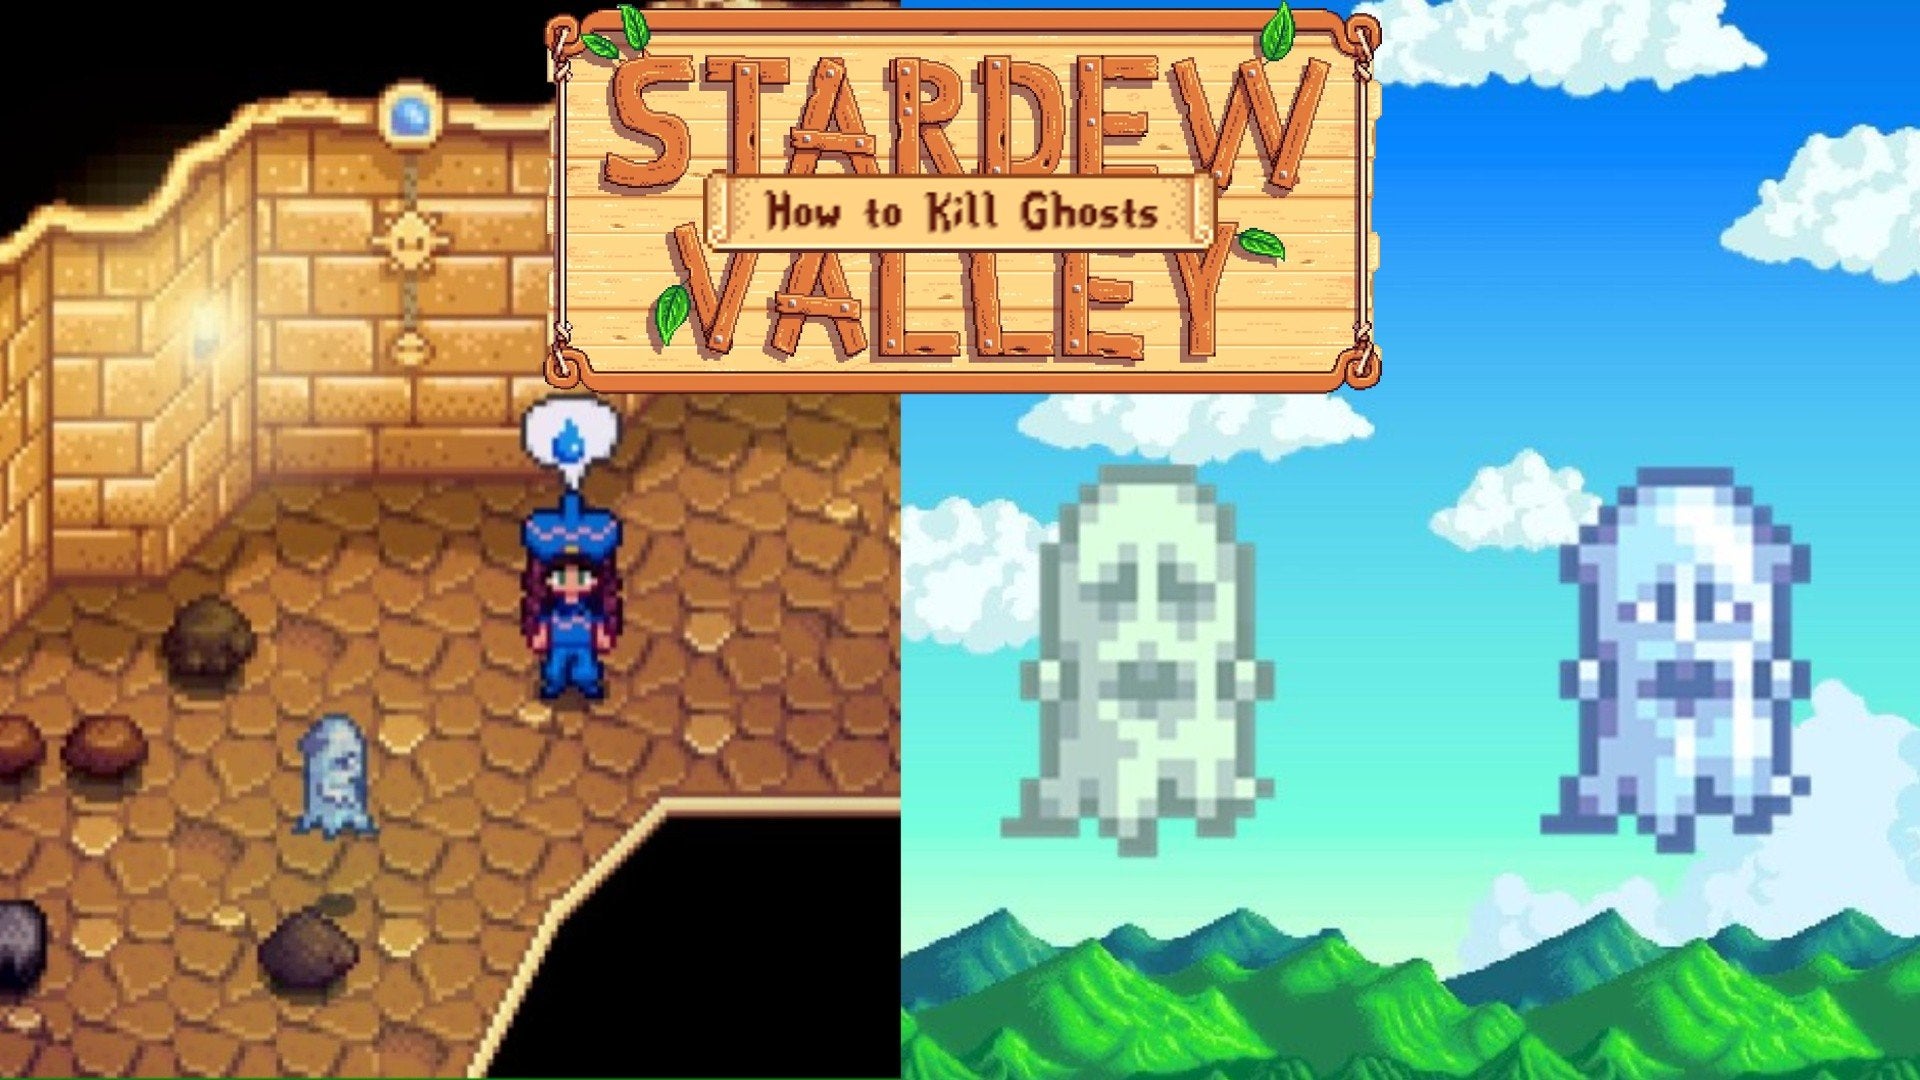 To the left is a player being follow by a Ghost, to the right is examples of Ghosts in Stardew Valley.